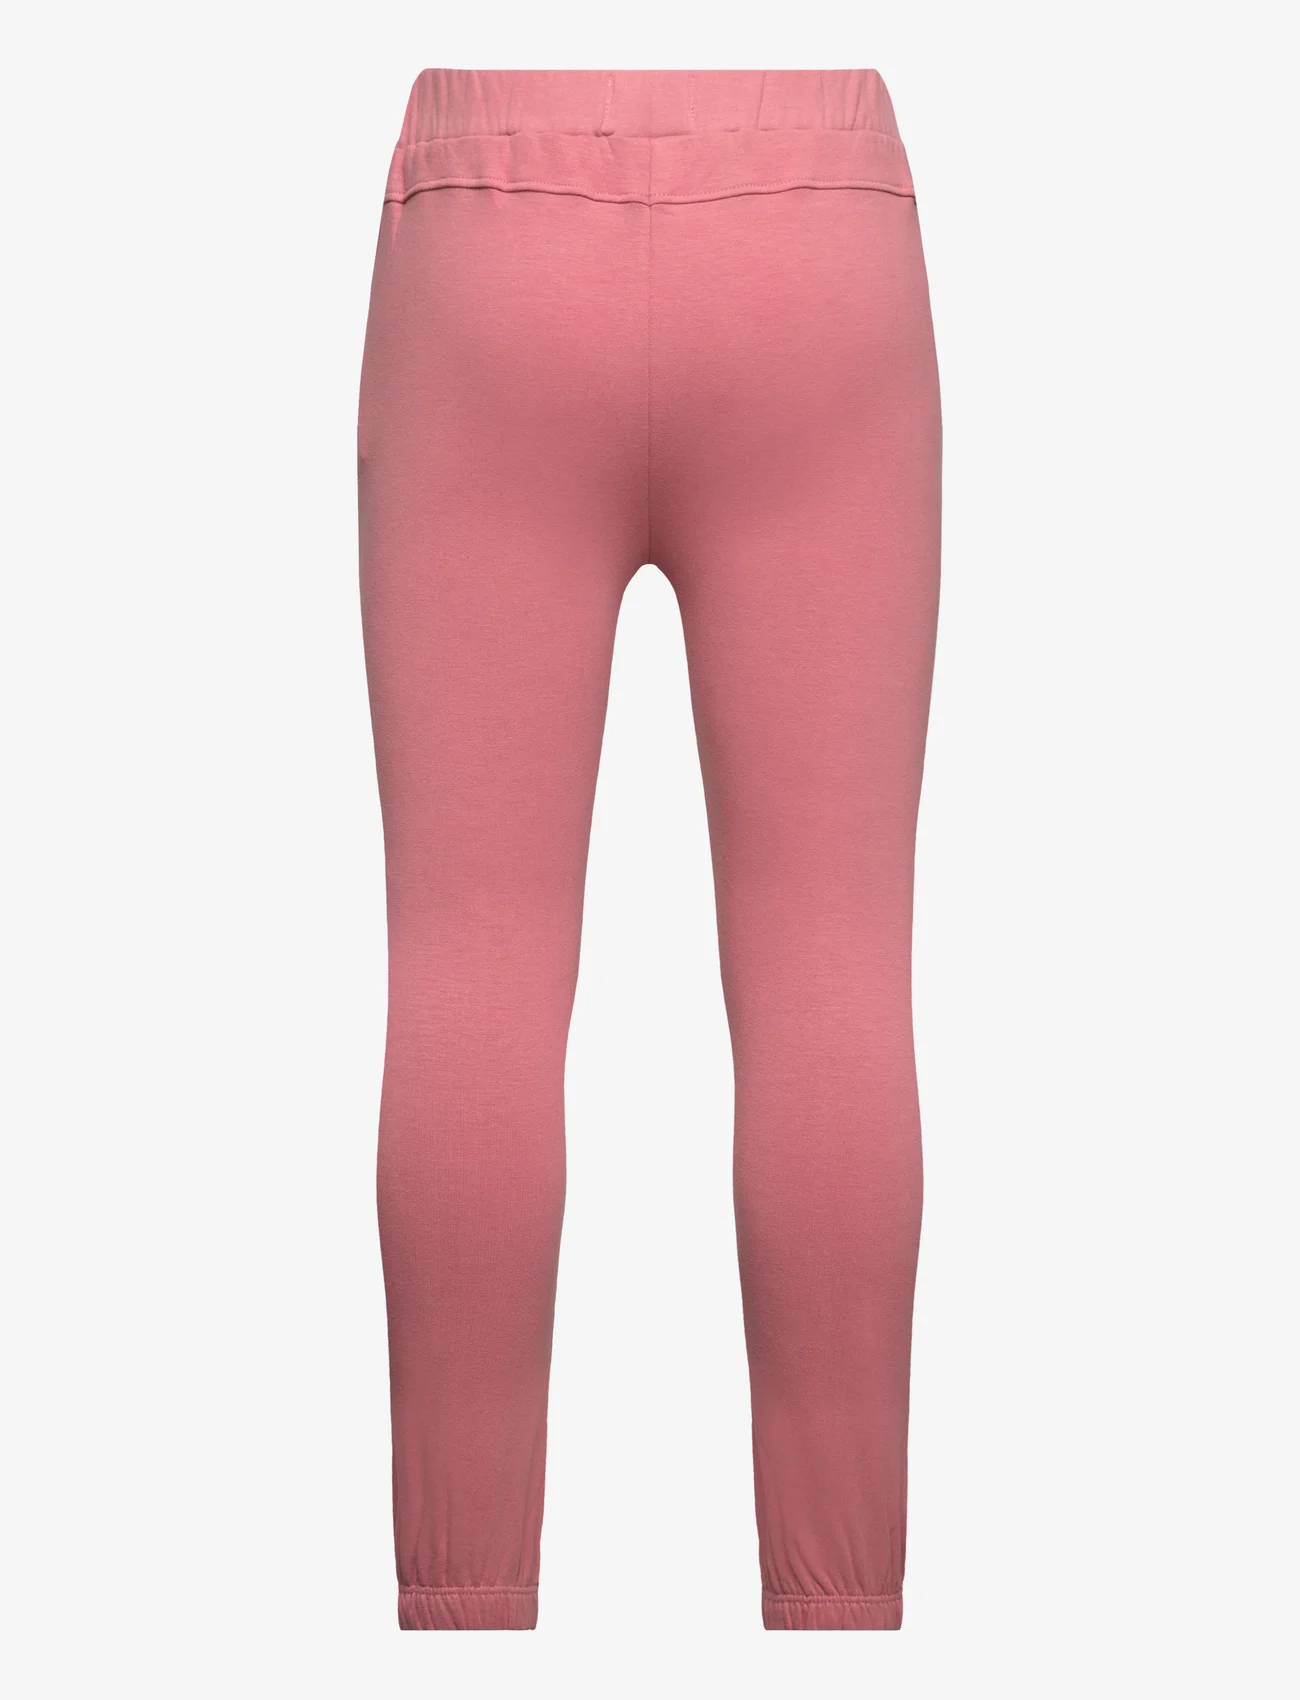 Creamie - Sweatpants - lowest prices - dusty rose - 1